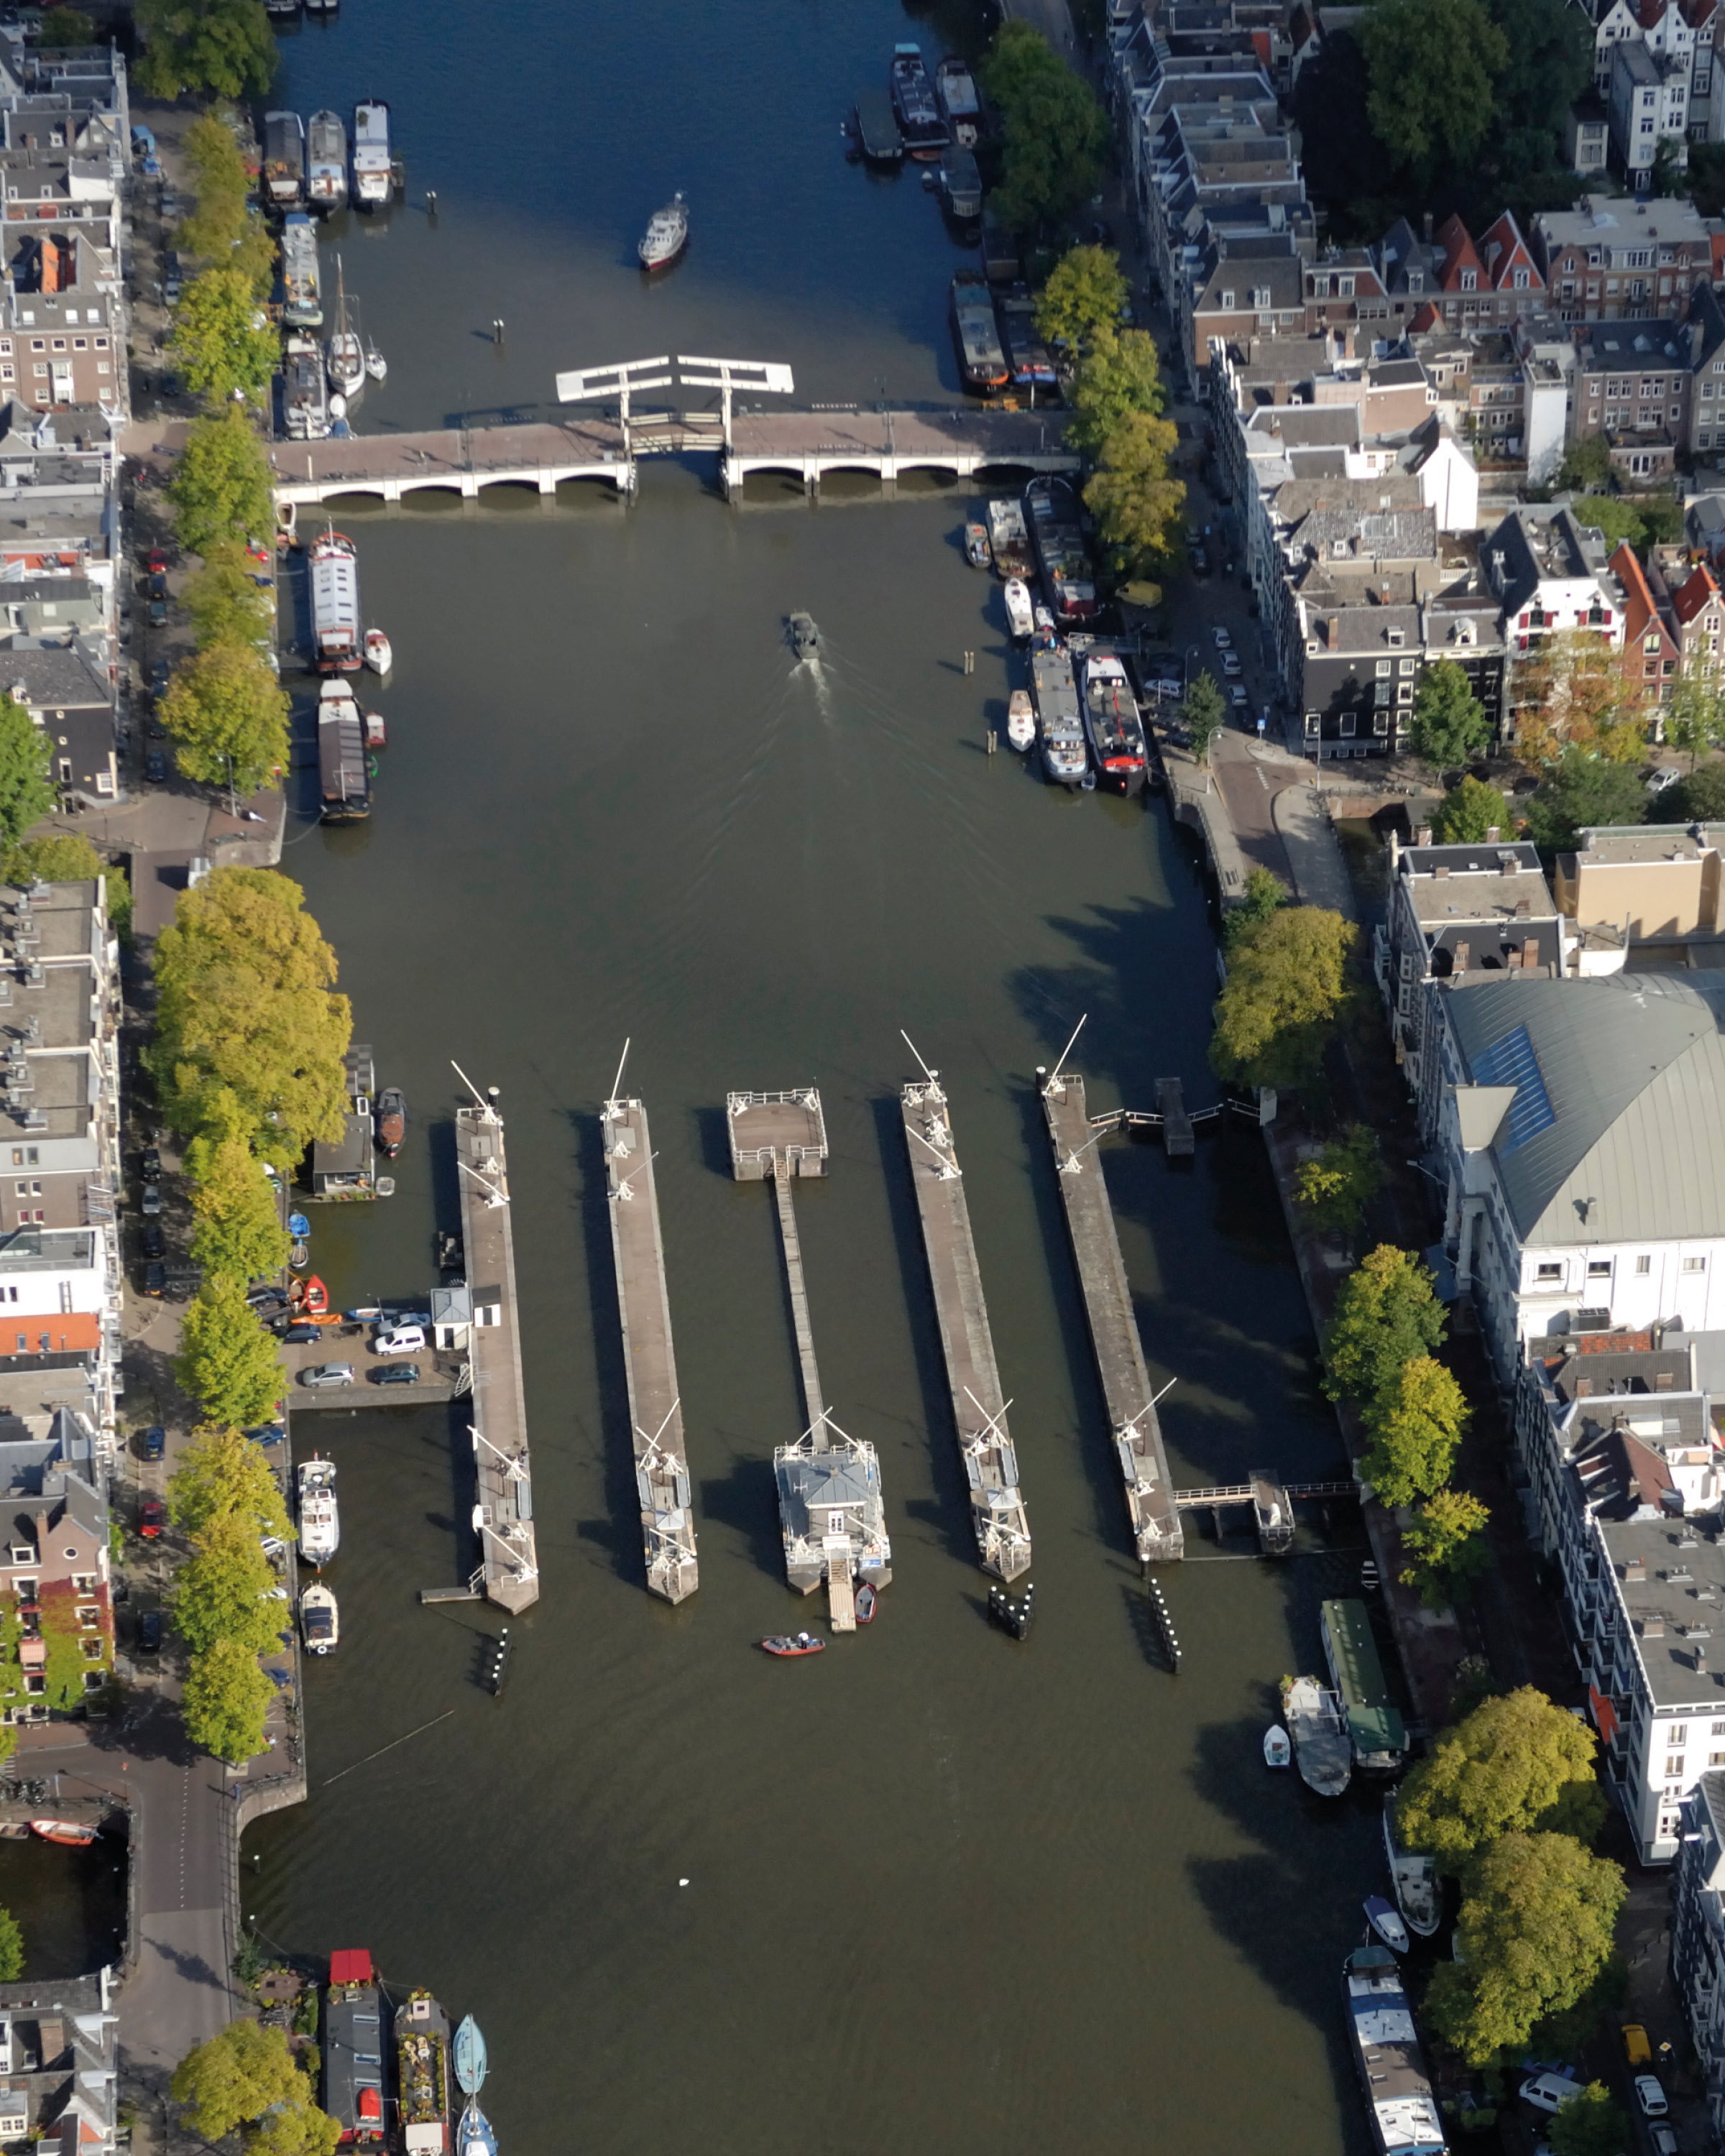 The Amstel Locks (1673) protected the Amstel River’s upstream areas, which are important for food production, from poor water quality by flushing water. The locks still play an important role in Amsterdam water management.